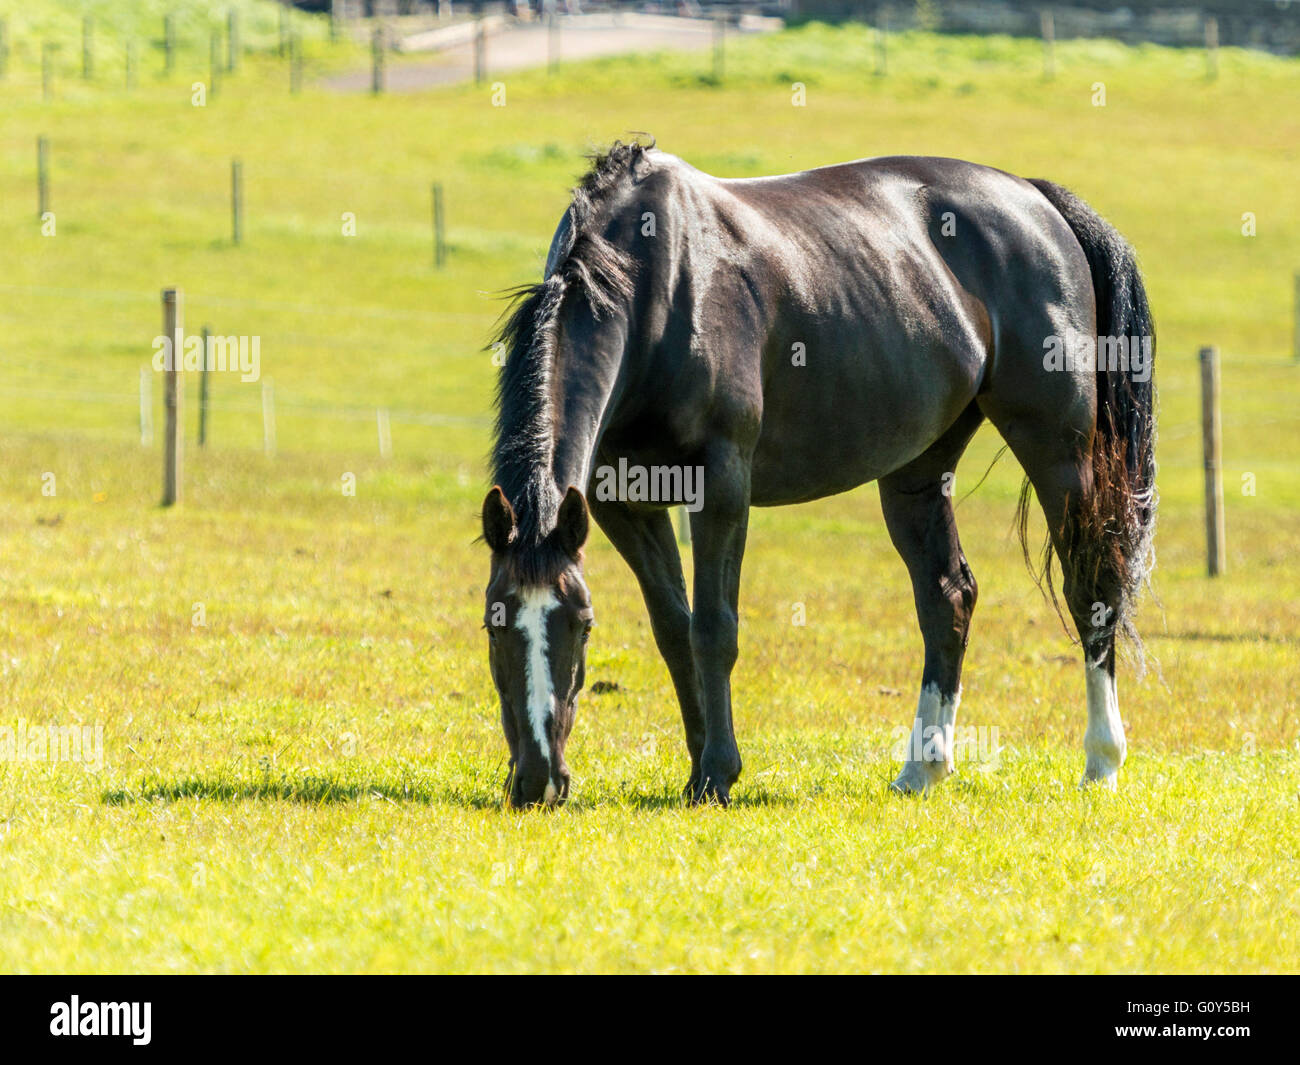 Black Hackney Stallion Horse grazing in green field with ears extended. Stock Photo